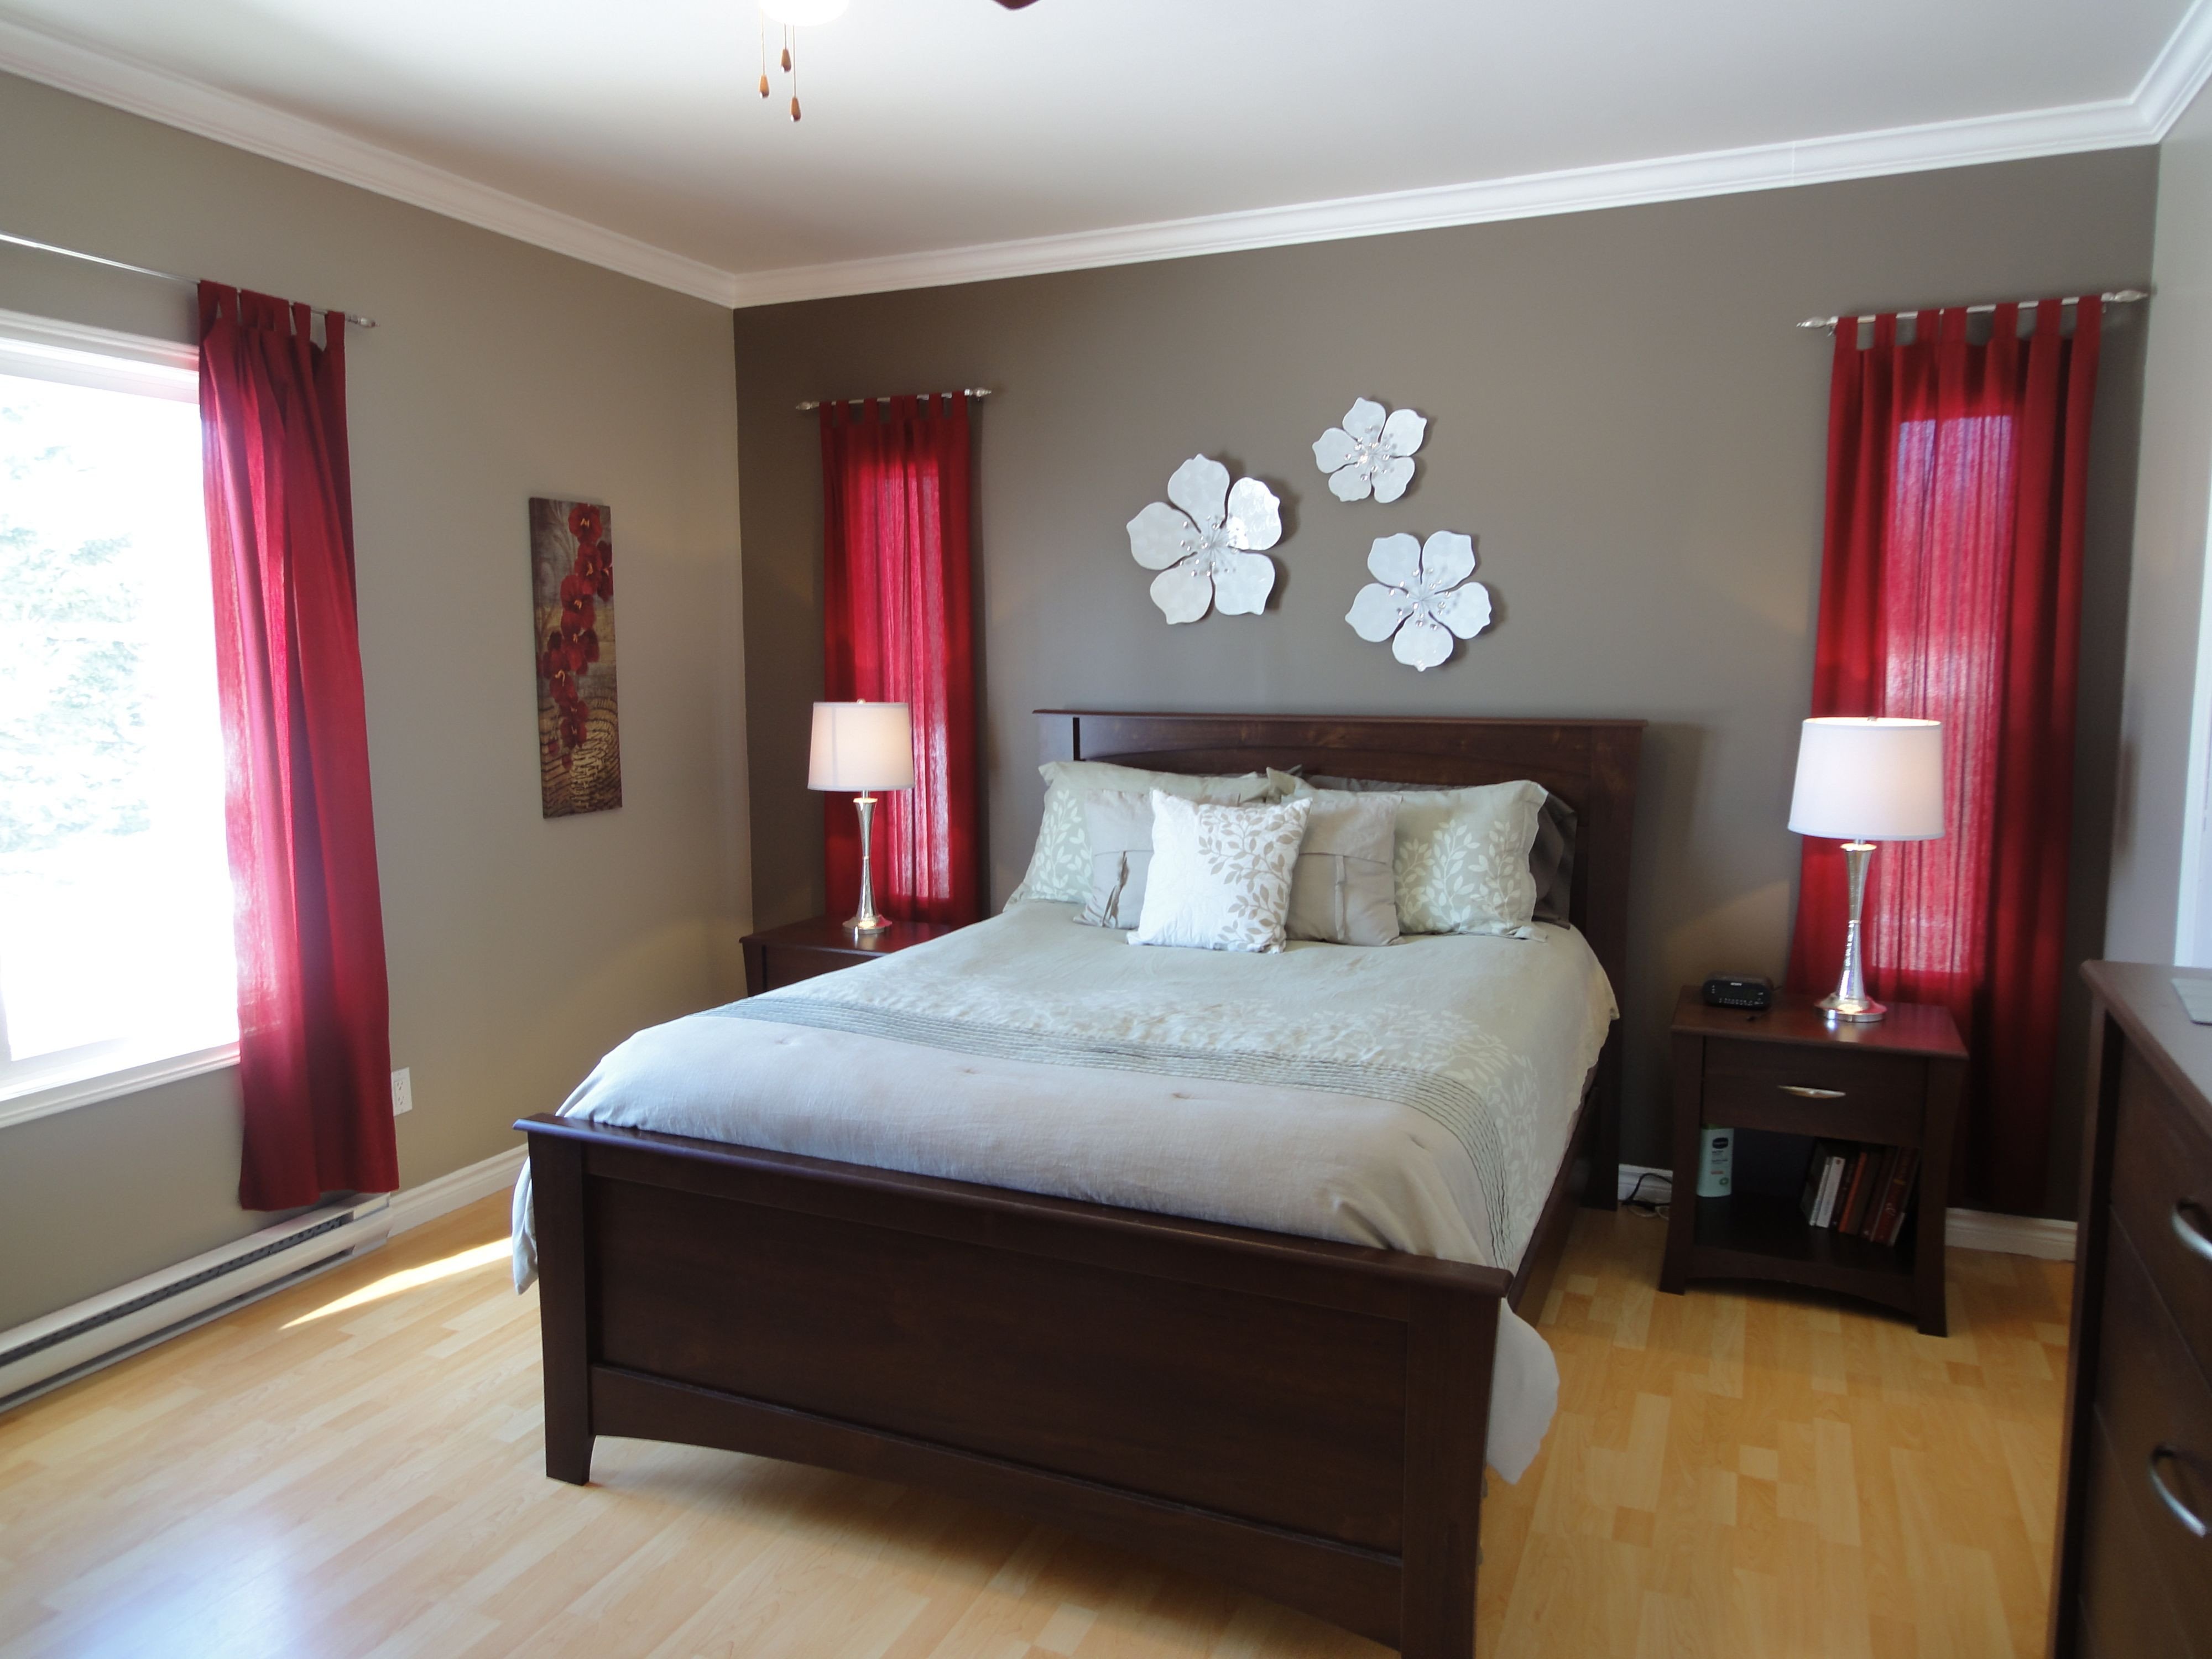 Grey and Tan Bedroom Luxury I Just Decorated Our Guest Bedroom with Red Accents I Would